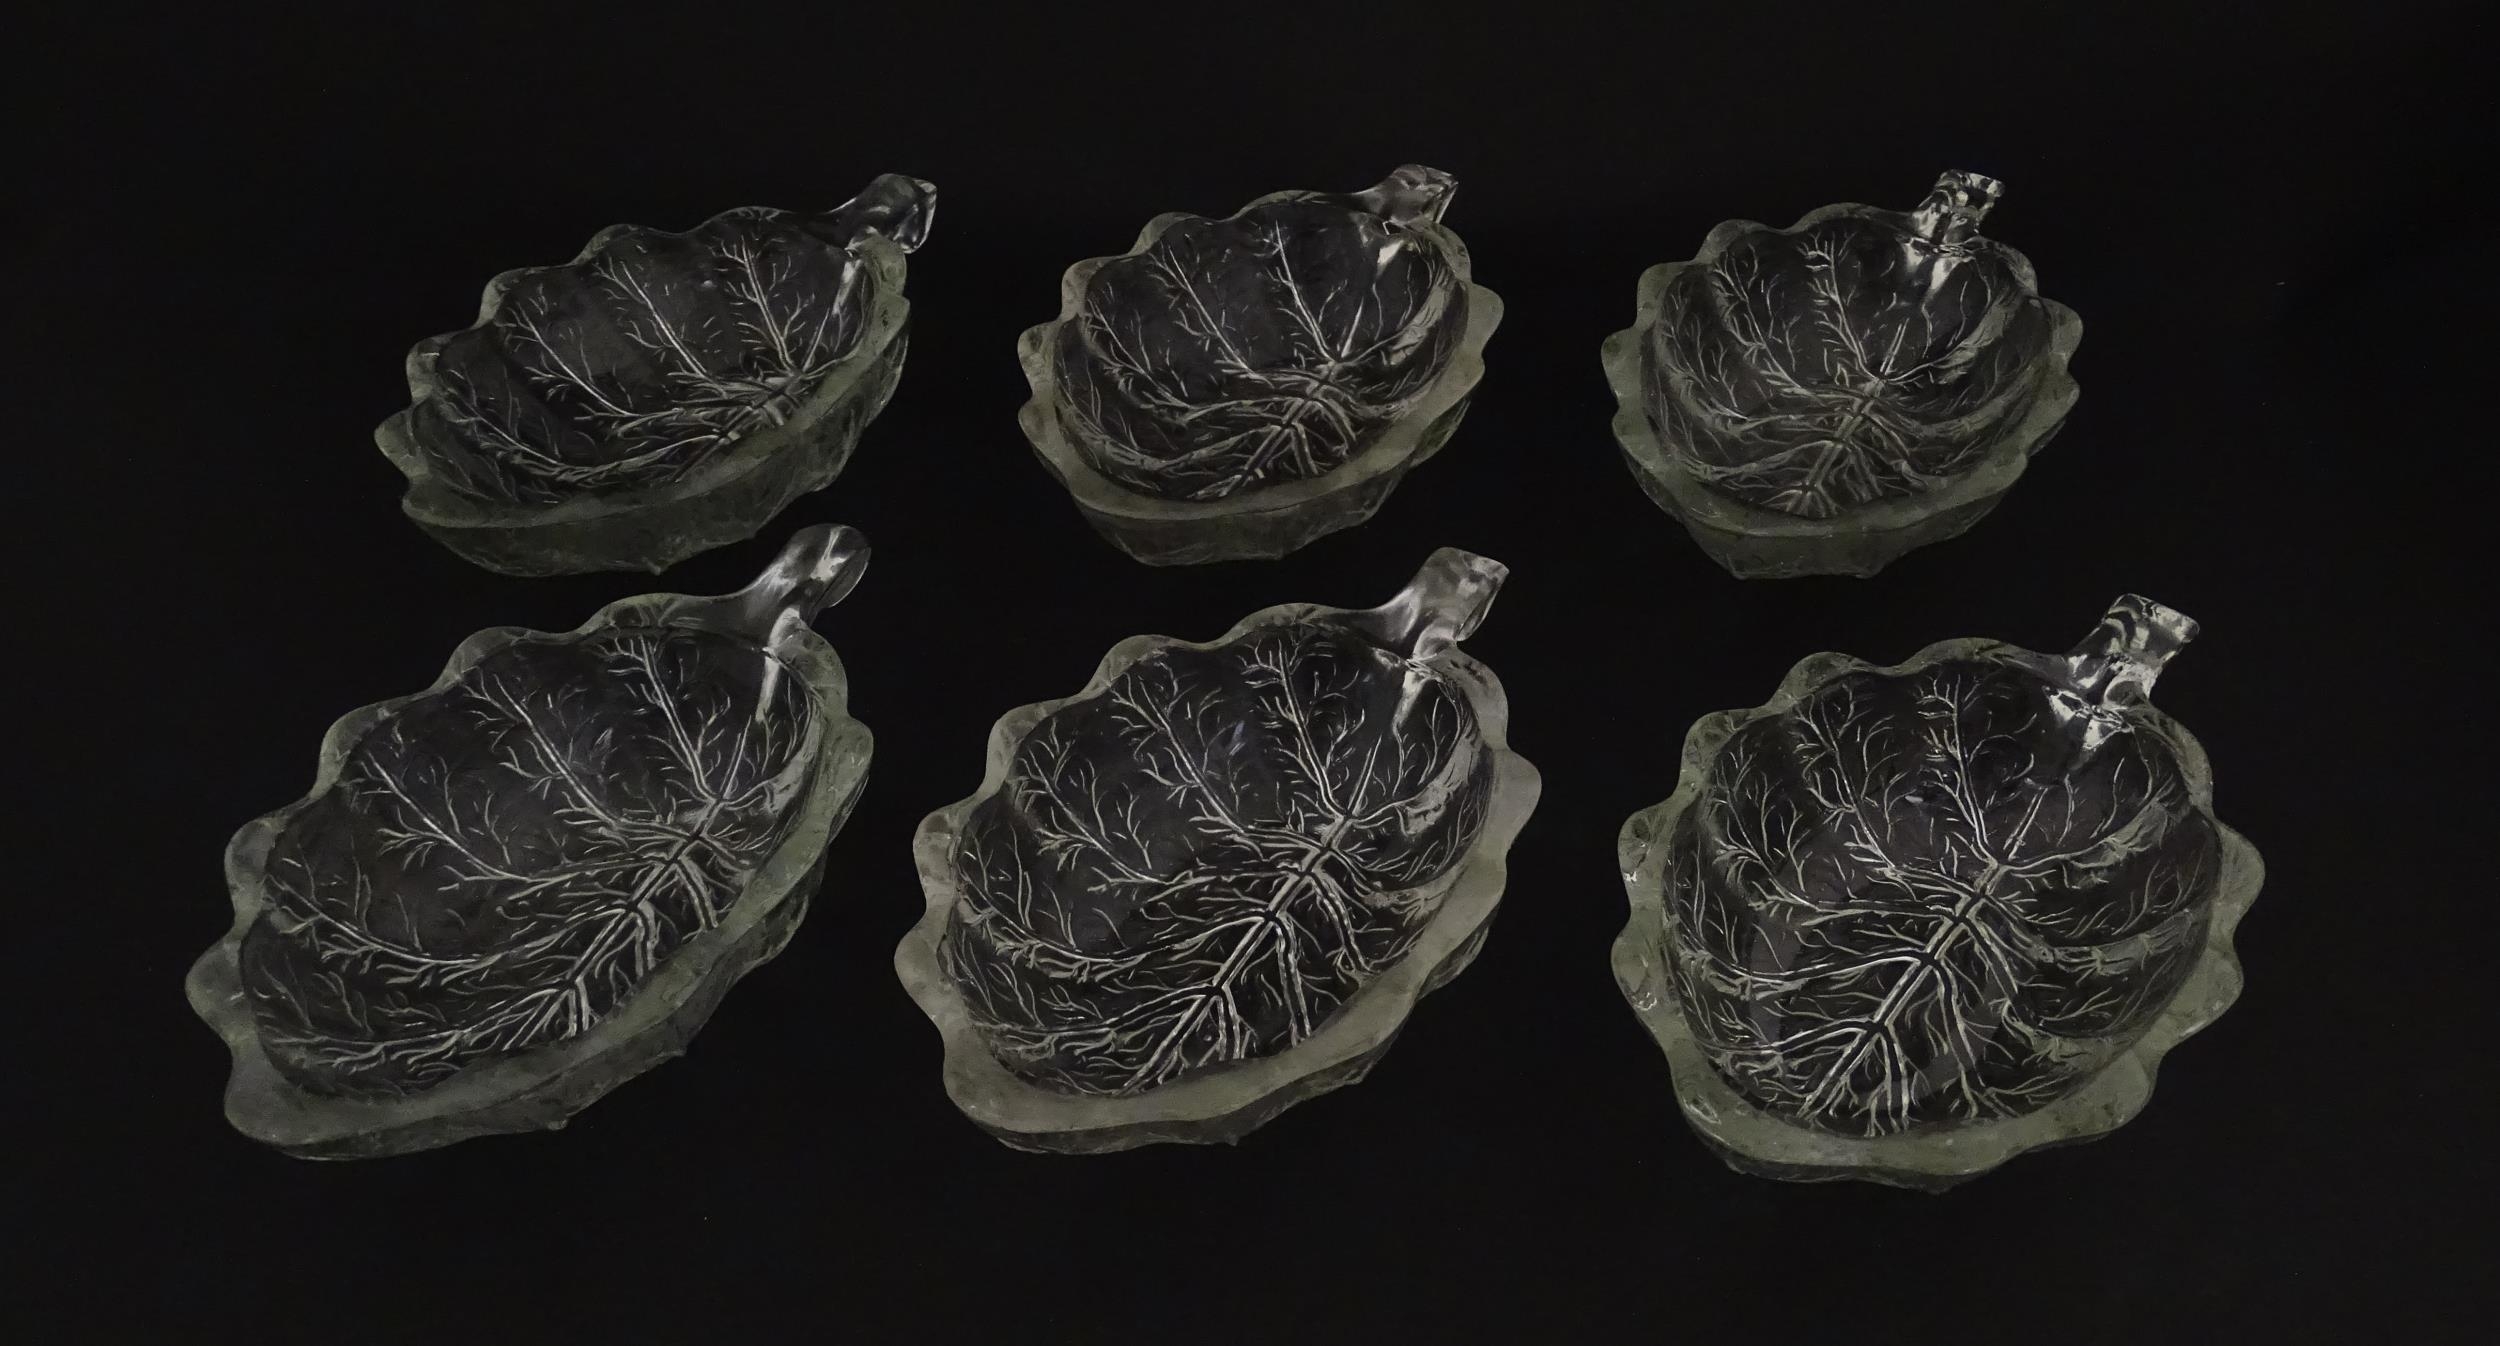 A set of six glass avocado dishes of stylised leaf form. Approx. 7" long Please Note - we do not